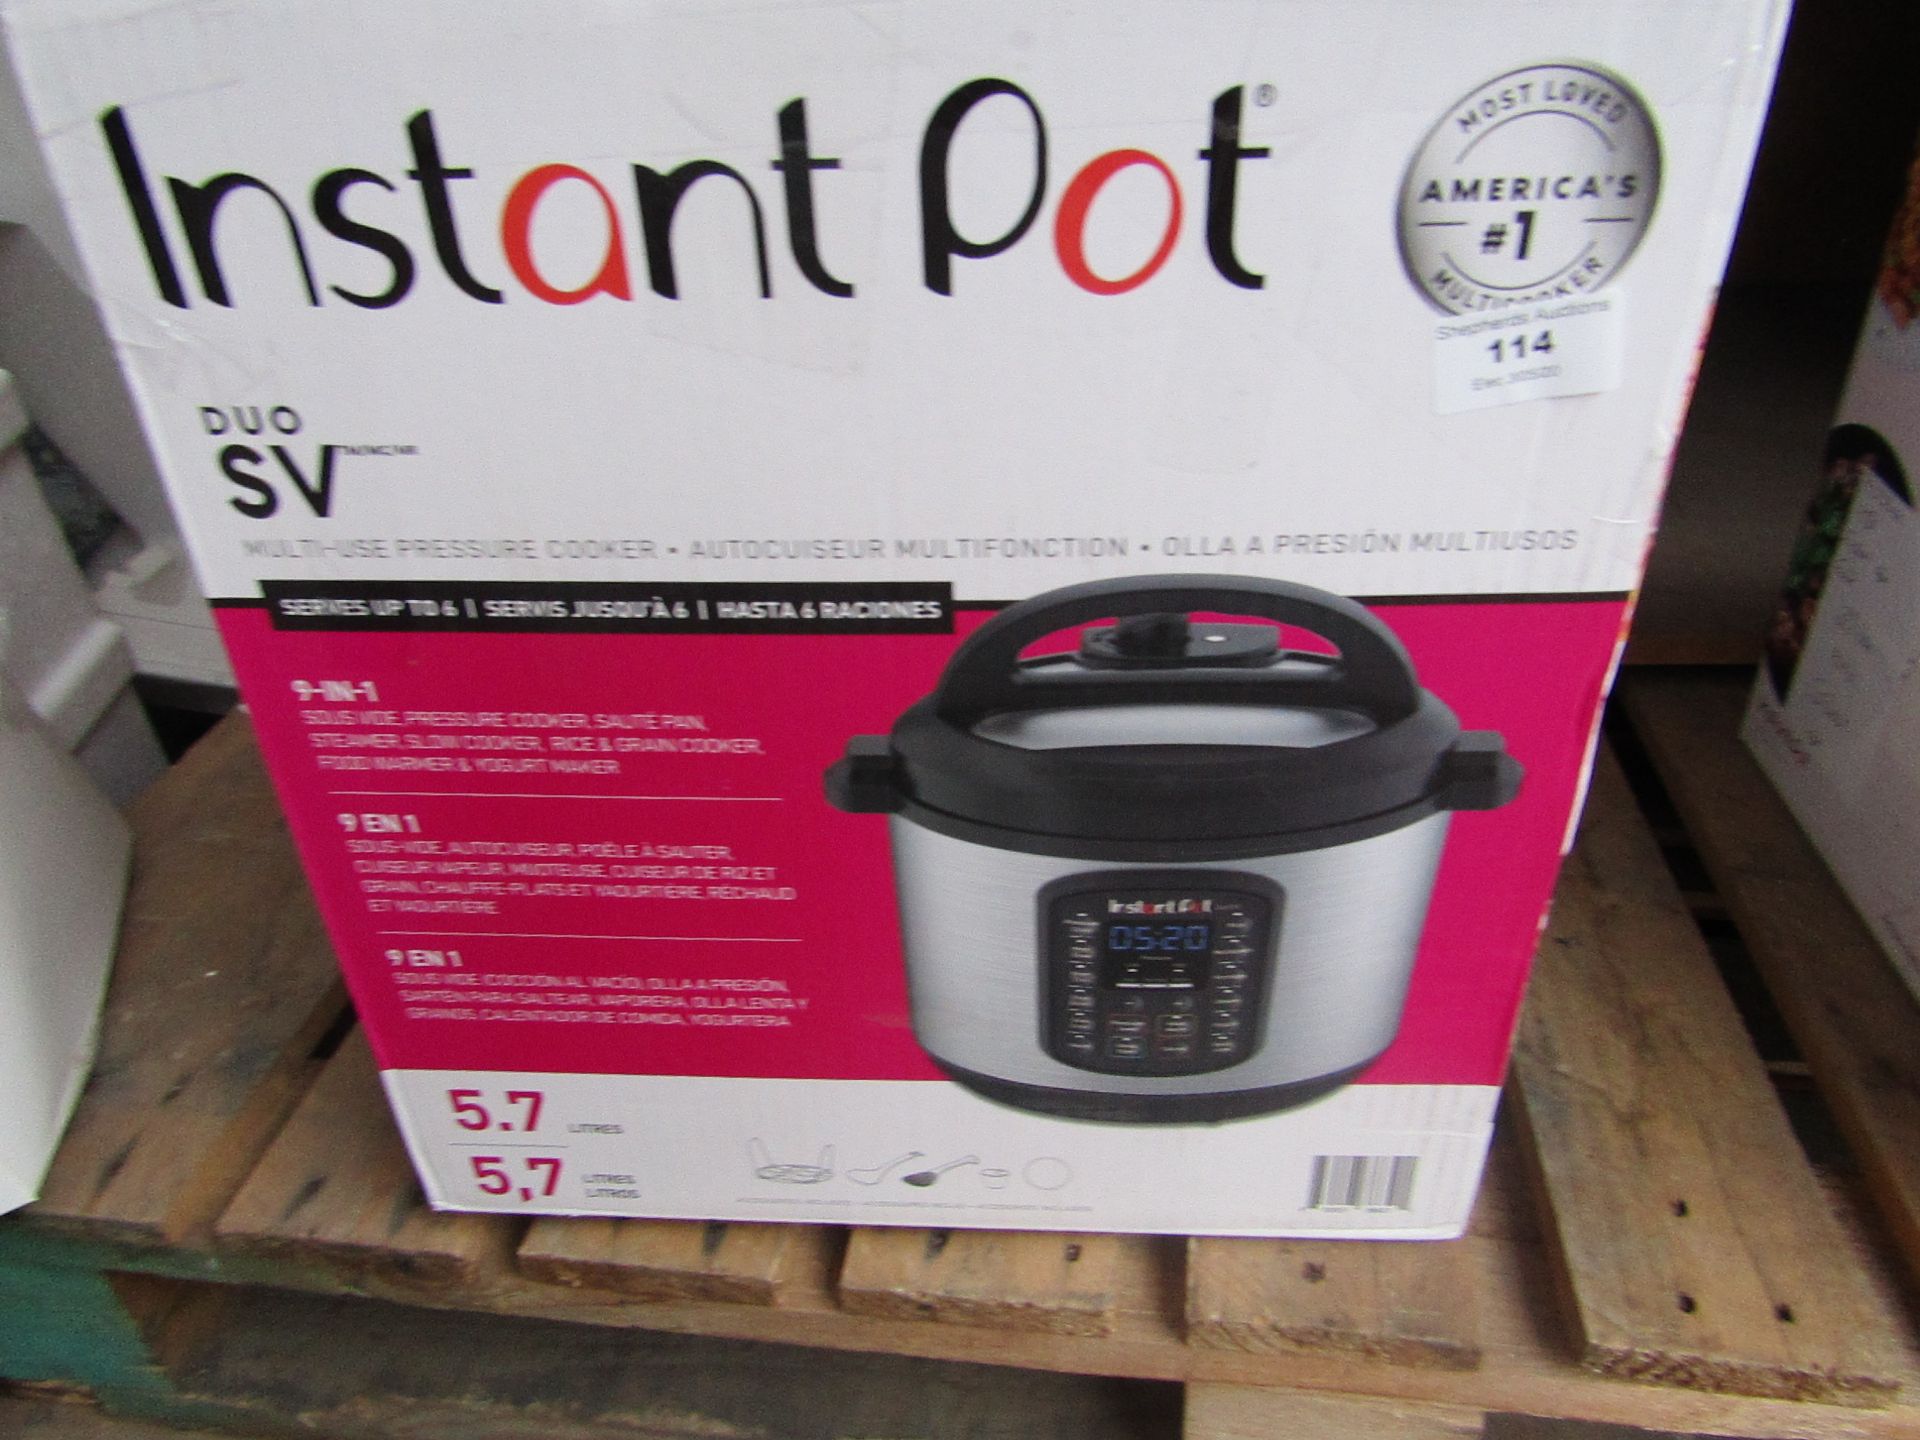 Instant Pot Duo SV 5.7Ltr Multi cooker, powers on and boxed, not checked it any further than